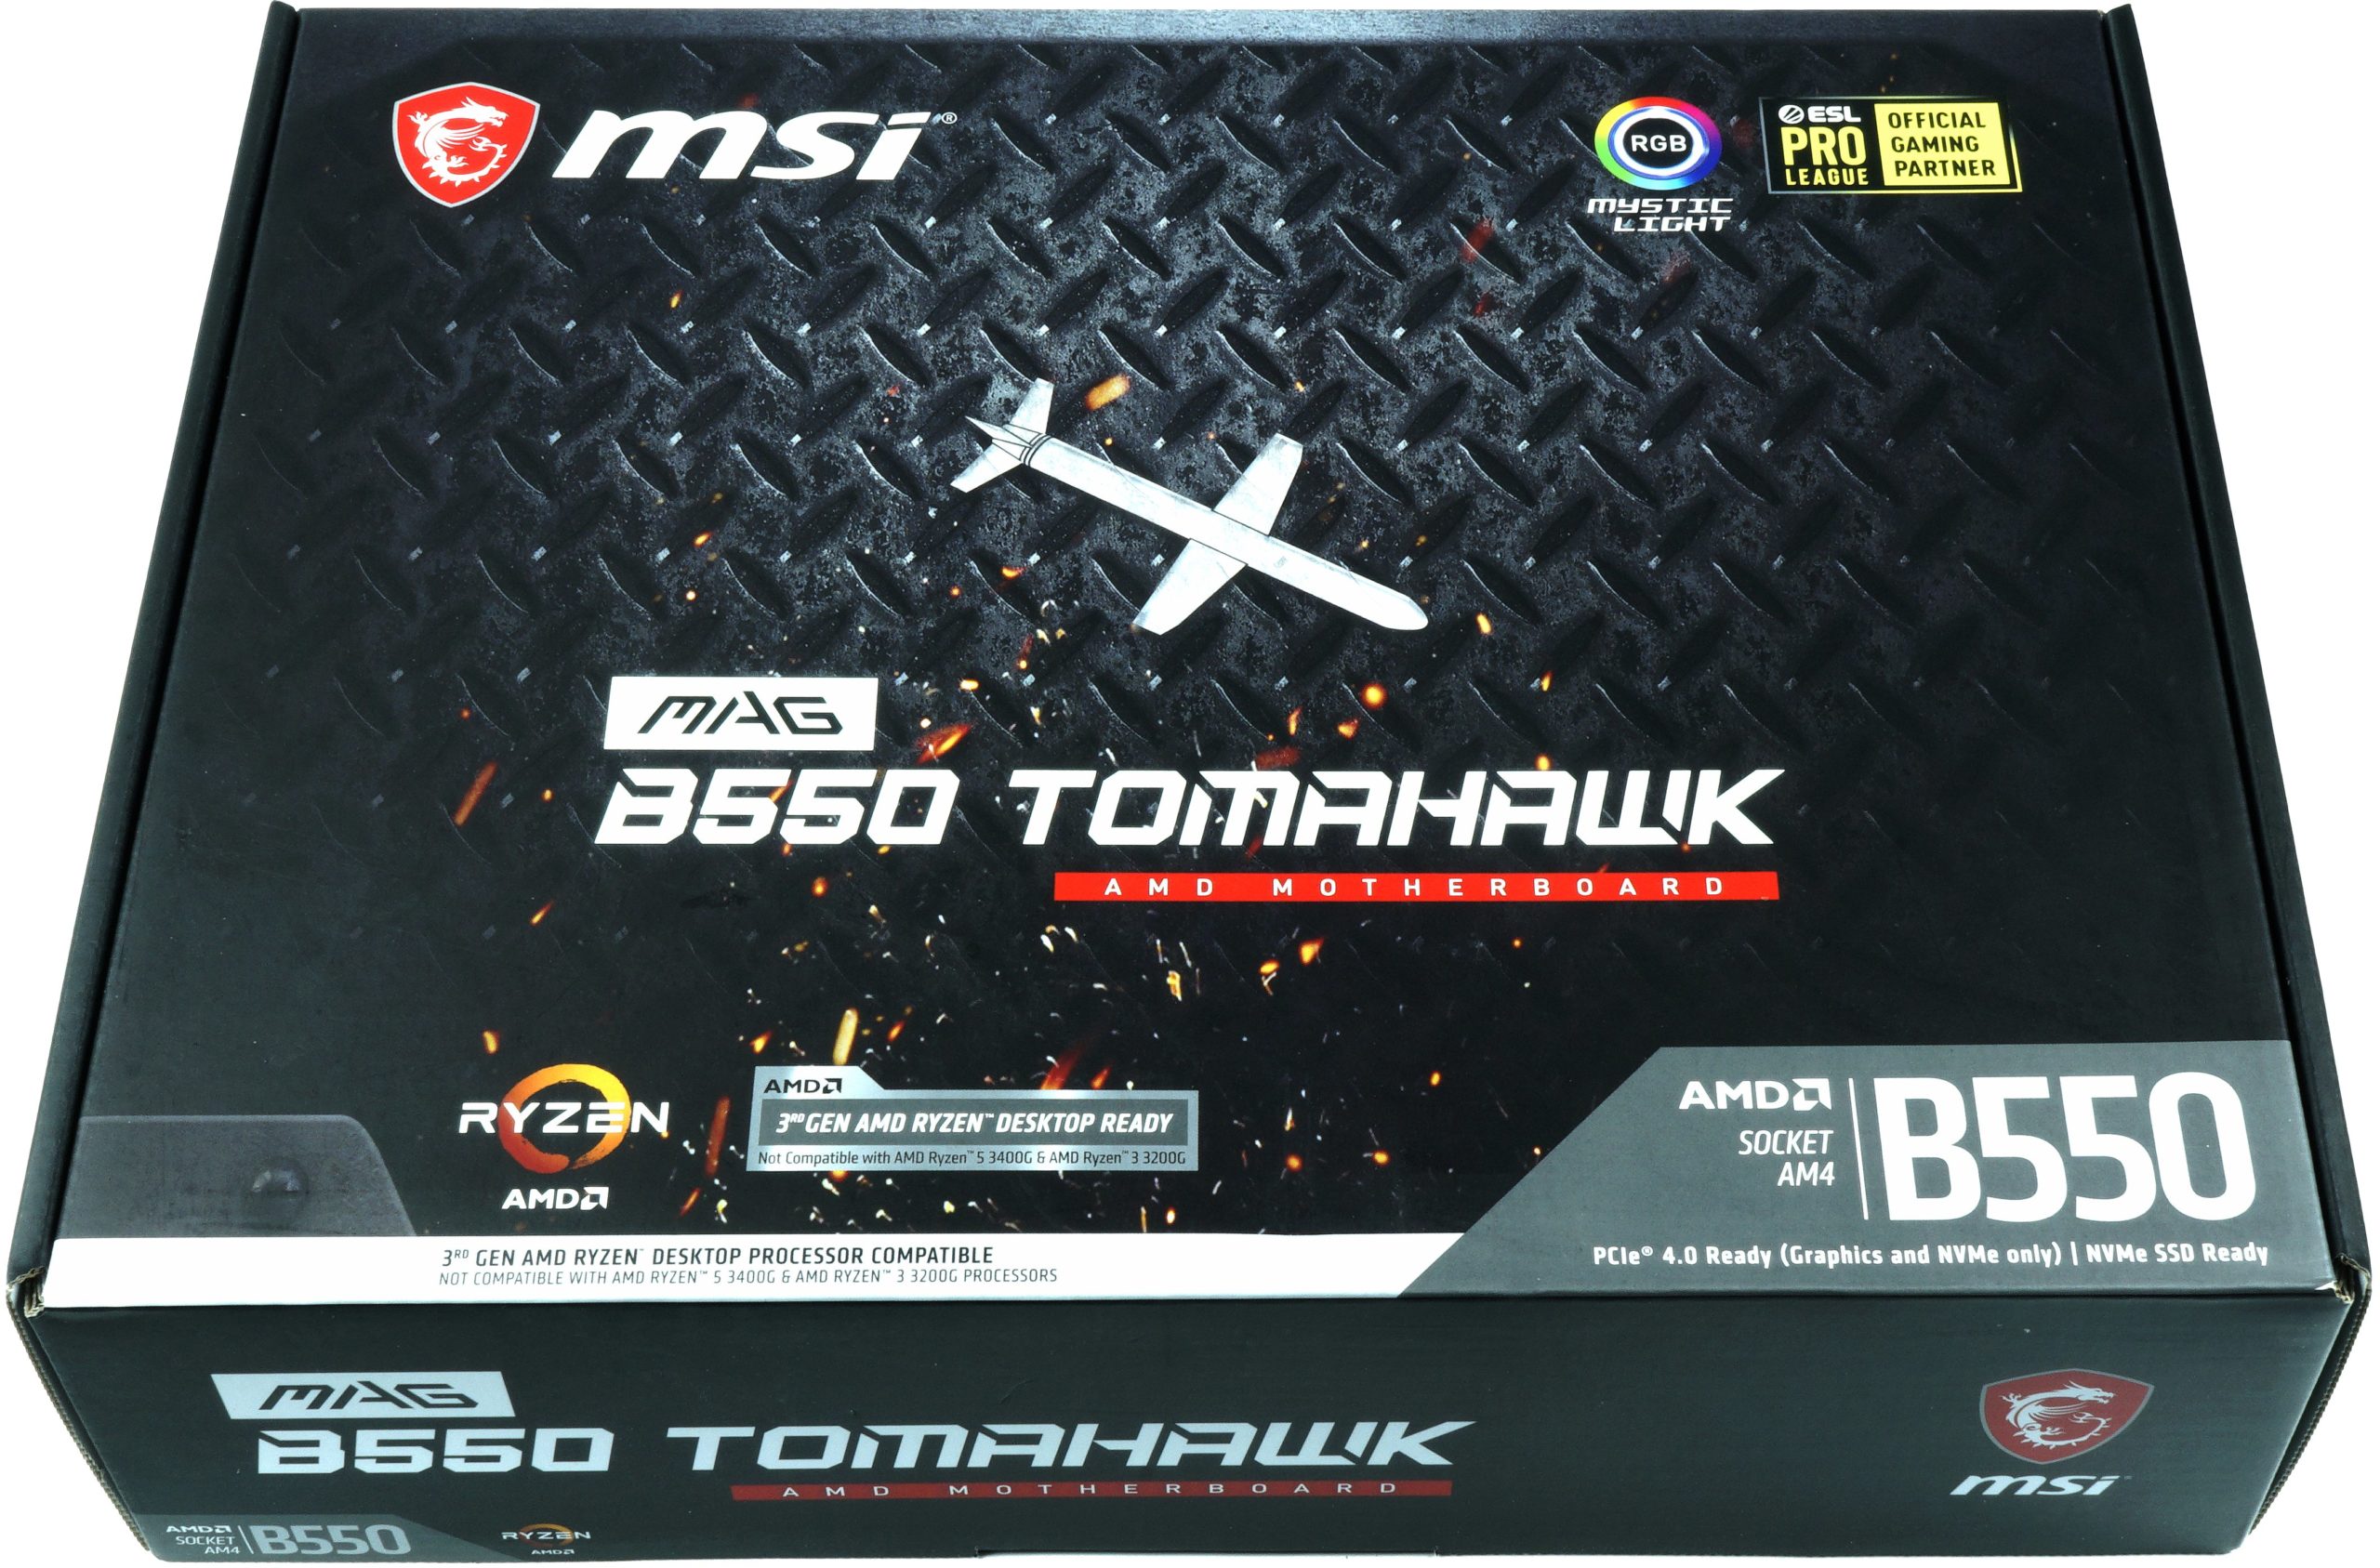 MSI B550-A Pro vs MSI MAG B550 Tomahawk: What is the difference?